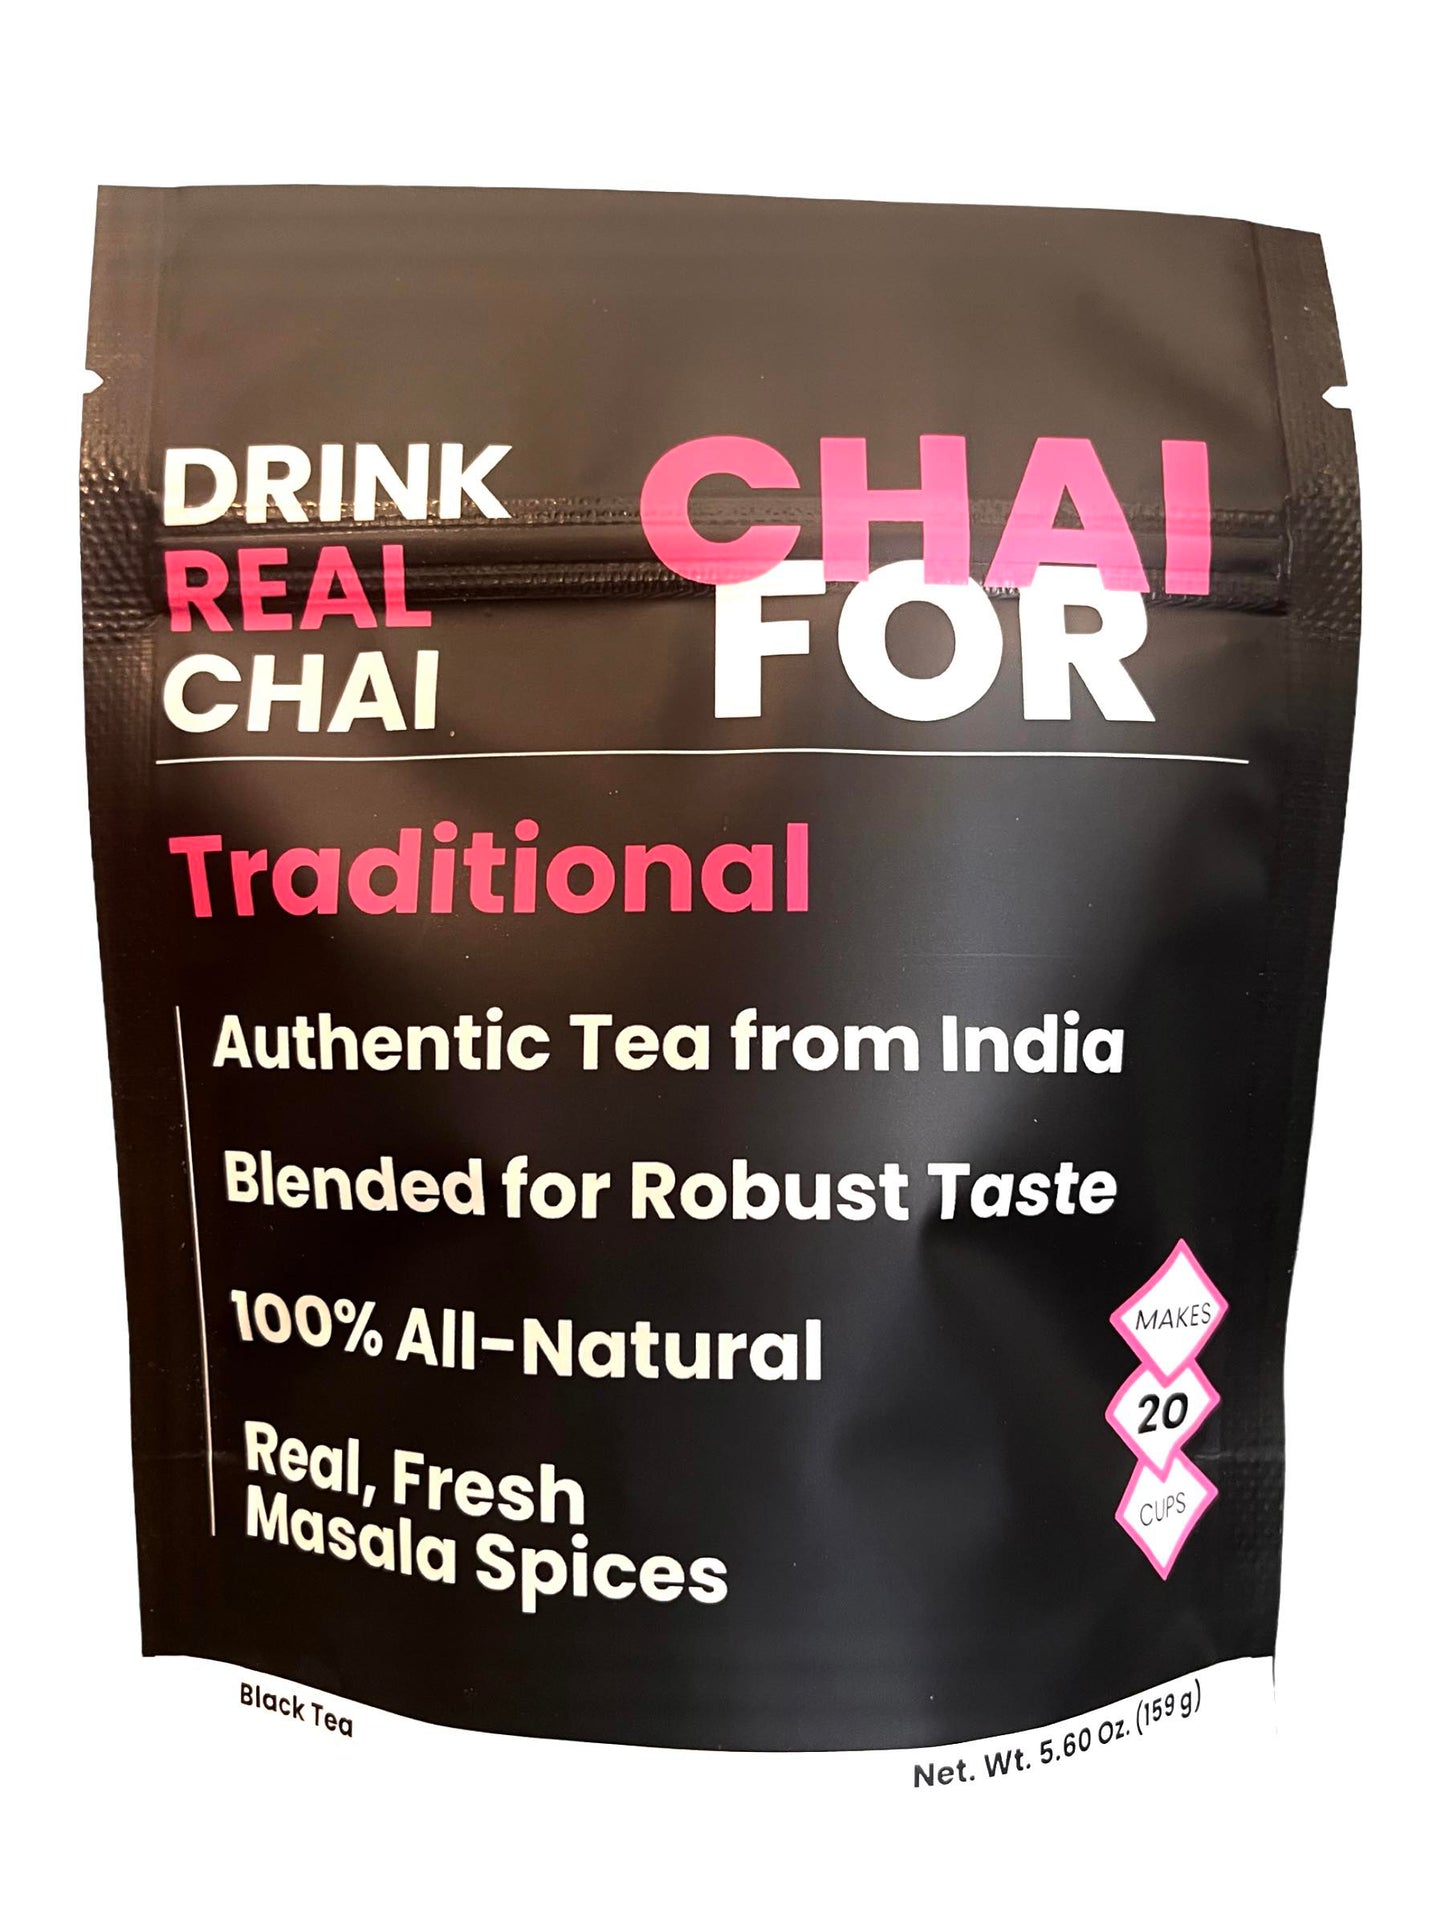 Traditional Chai Packaging showing special features of the chai.